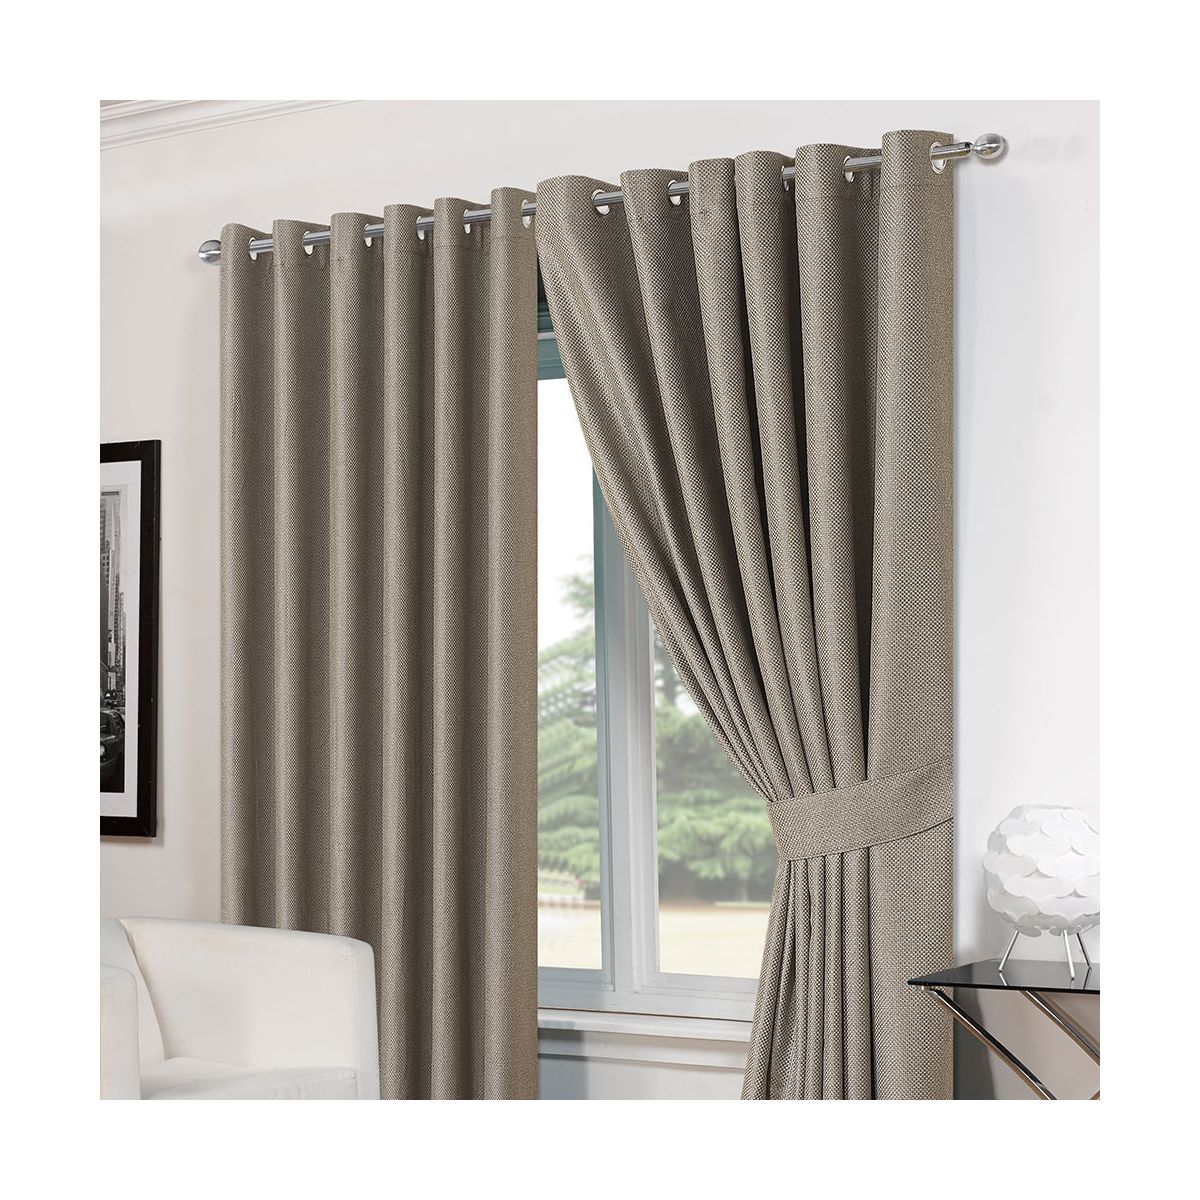 Luxury Basket Weave Lined  Eyelet Curtains with Tiebacks - Silver Grey 46"x72"